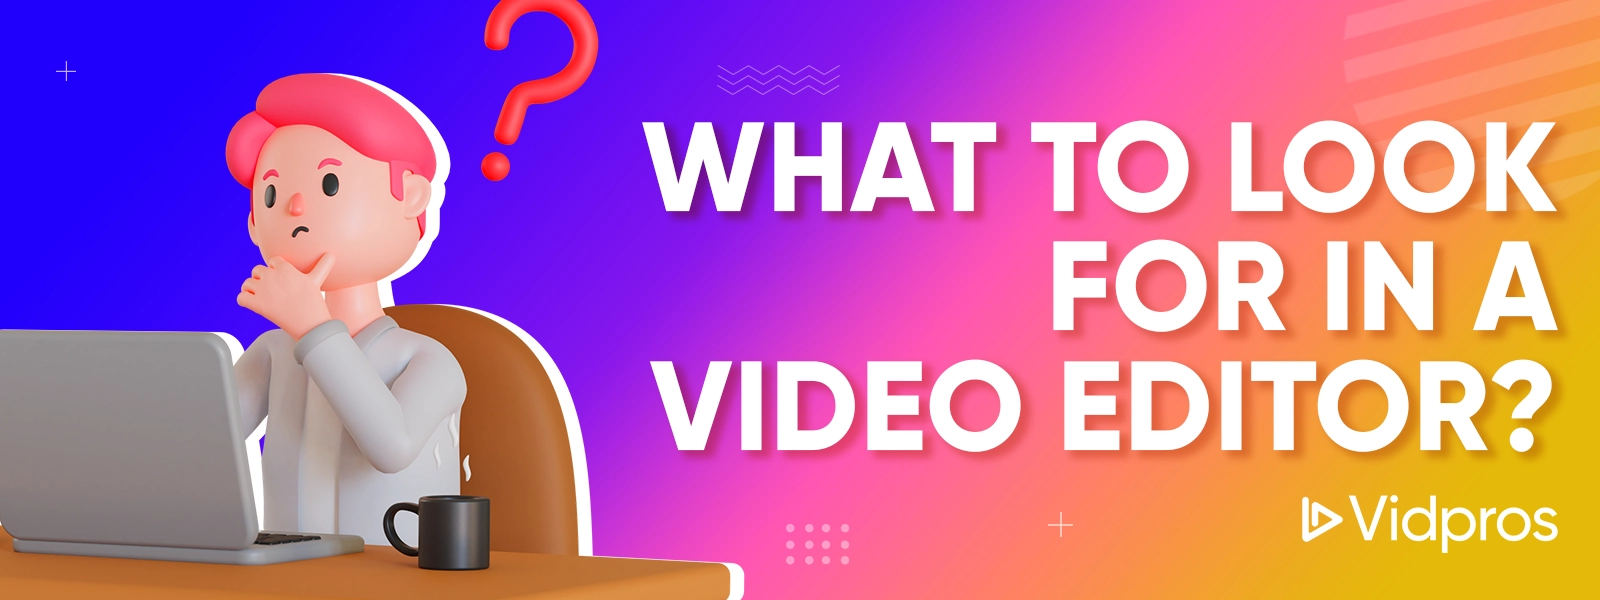 what to look for in a video editor